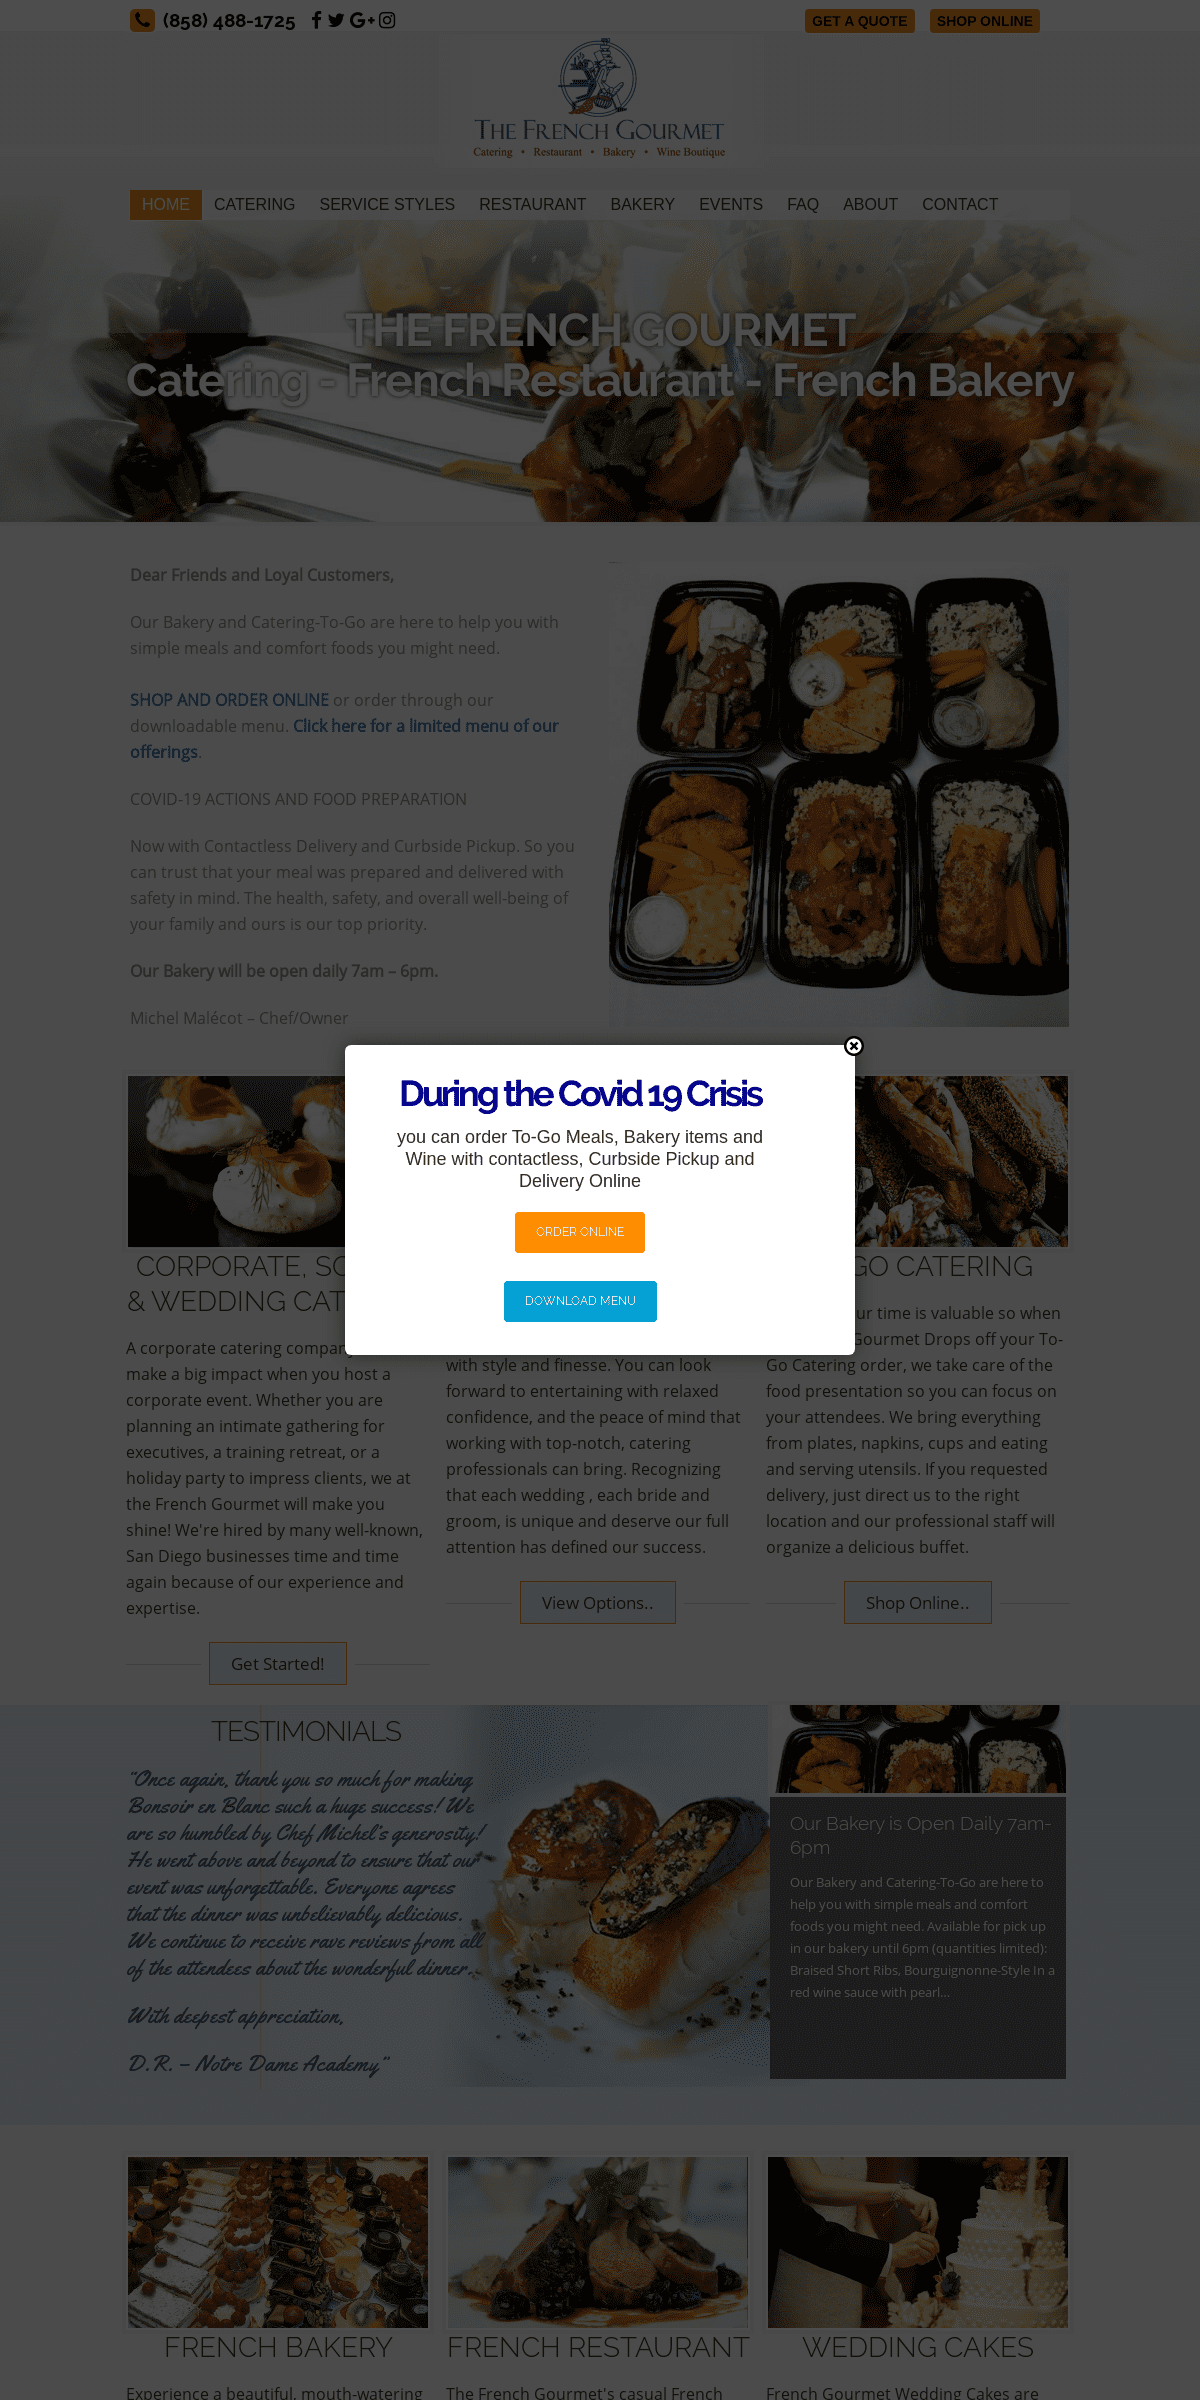 A complete backup of thefrenchgourmet.com